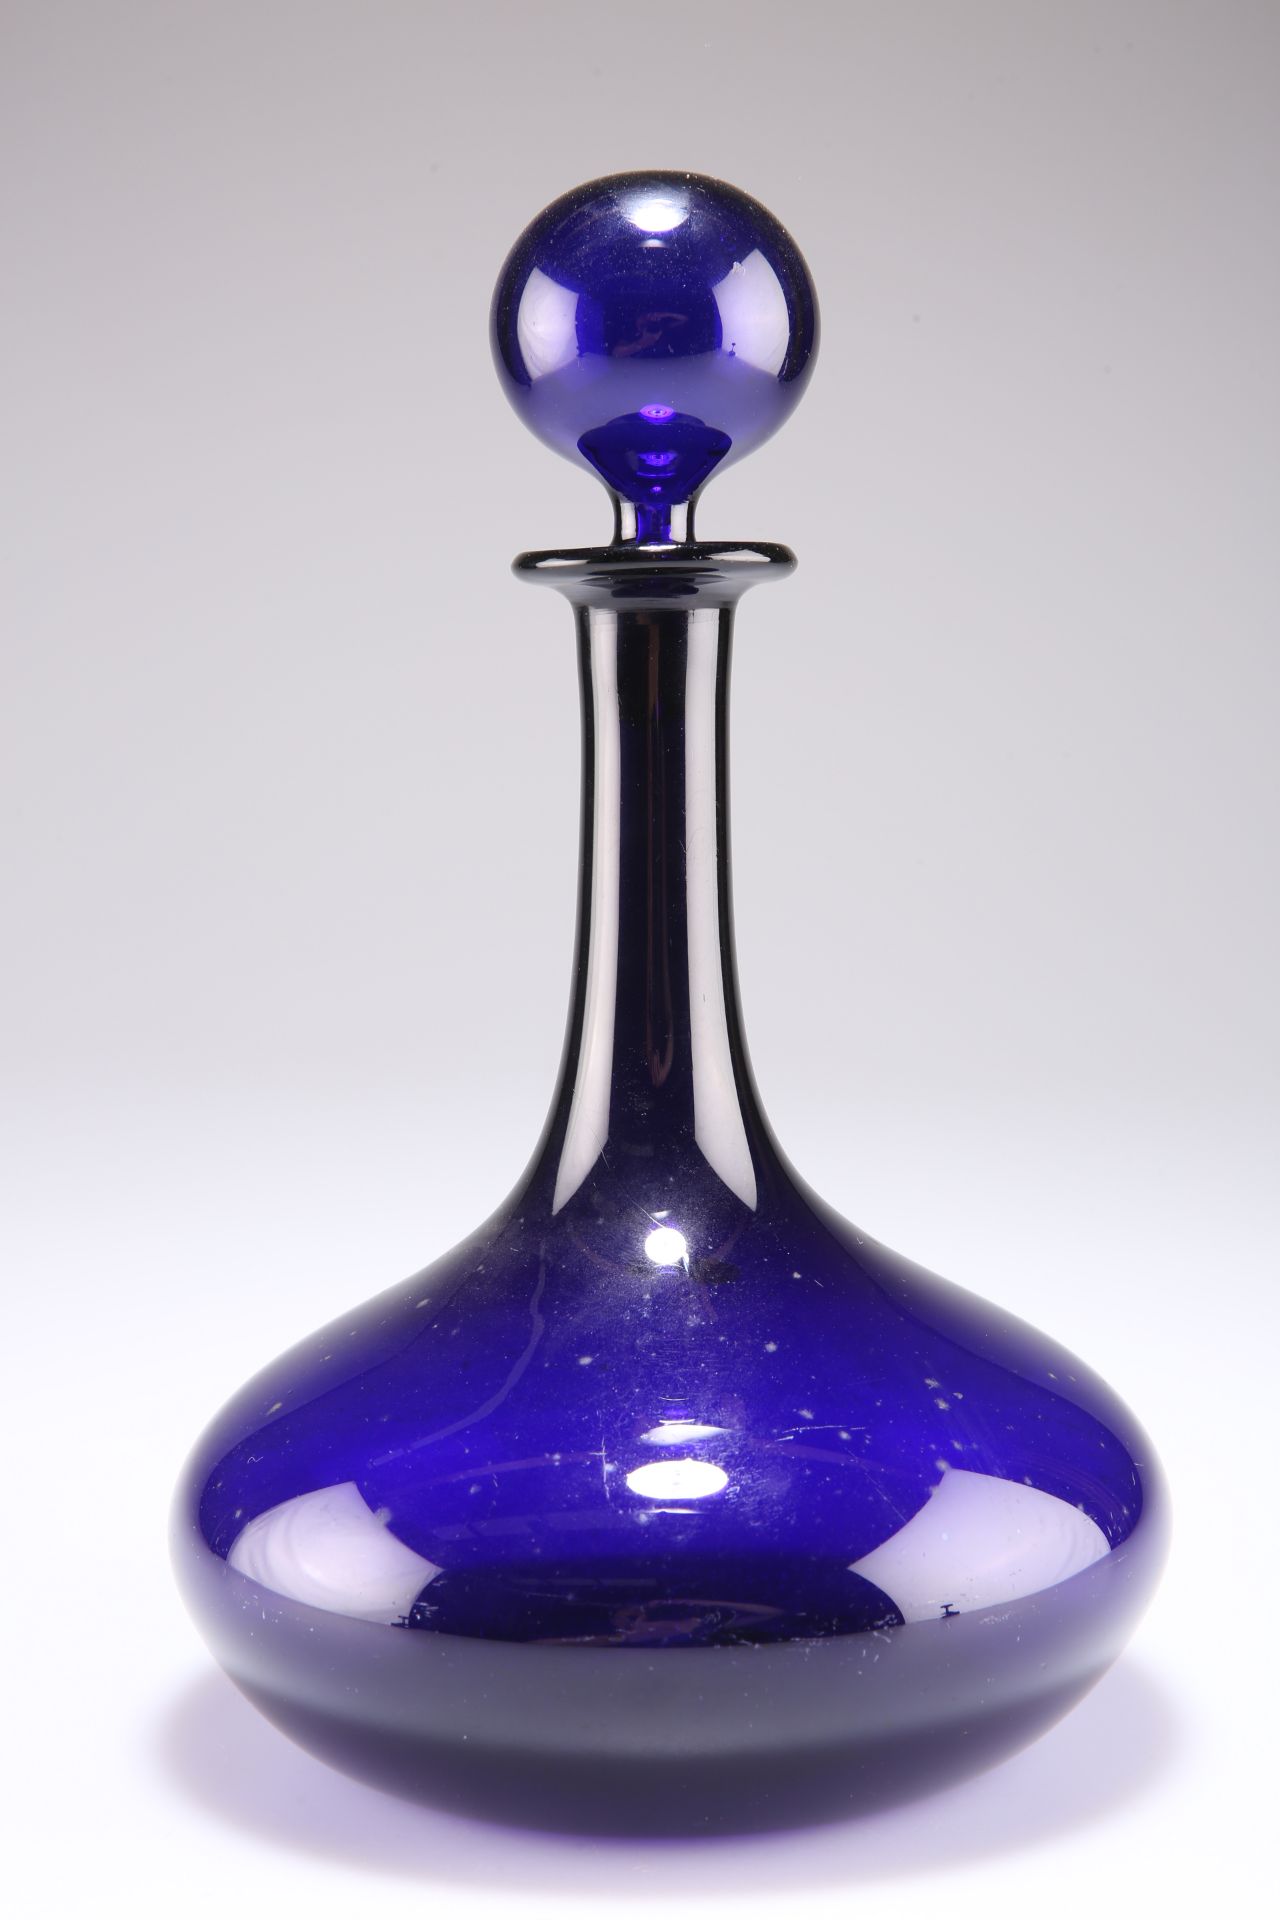 AN EARLY 19TH CENTURY BRISTOL BLUE GLASS DECANTER AND STOPPER